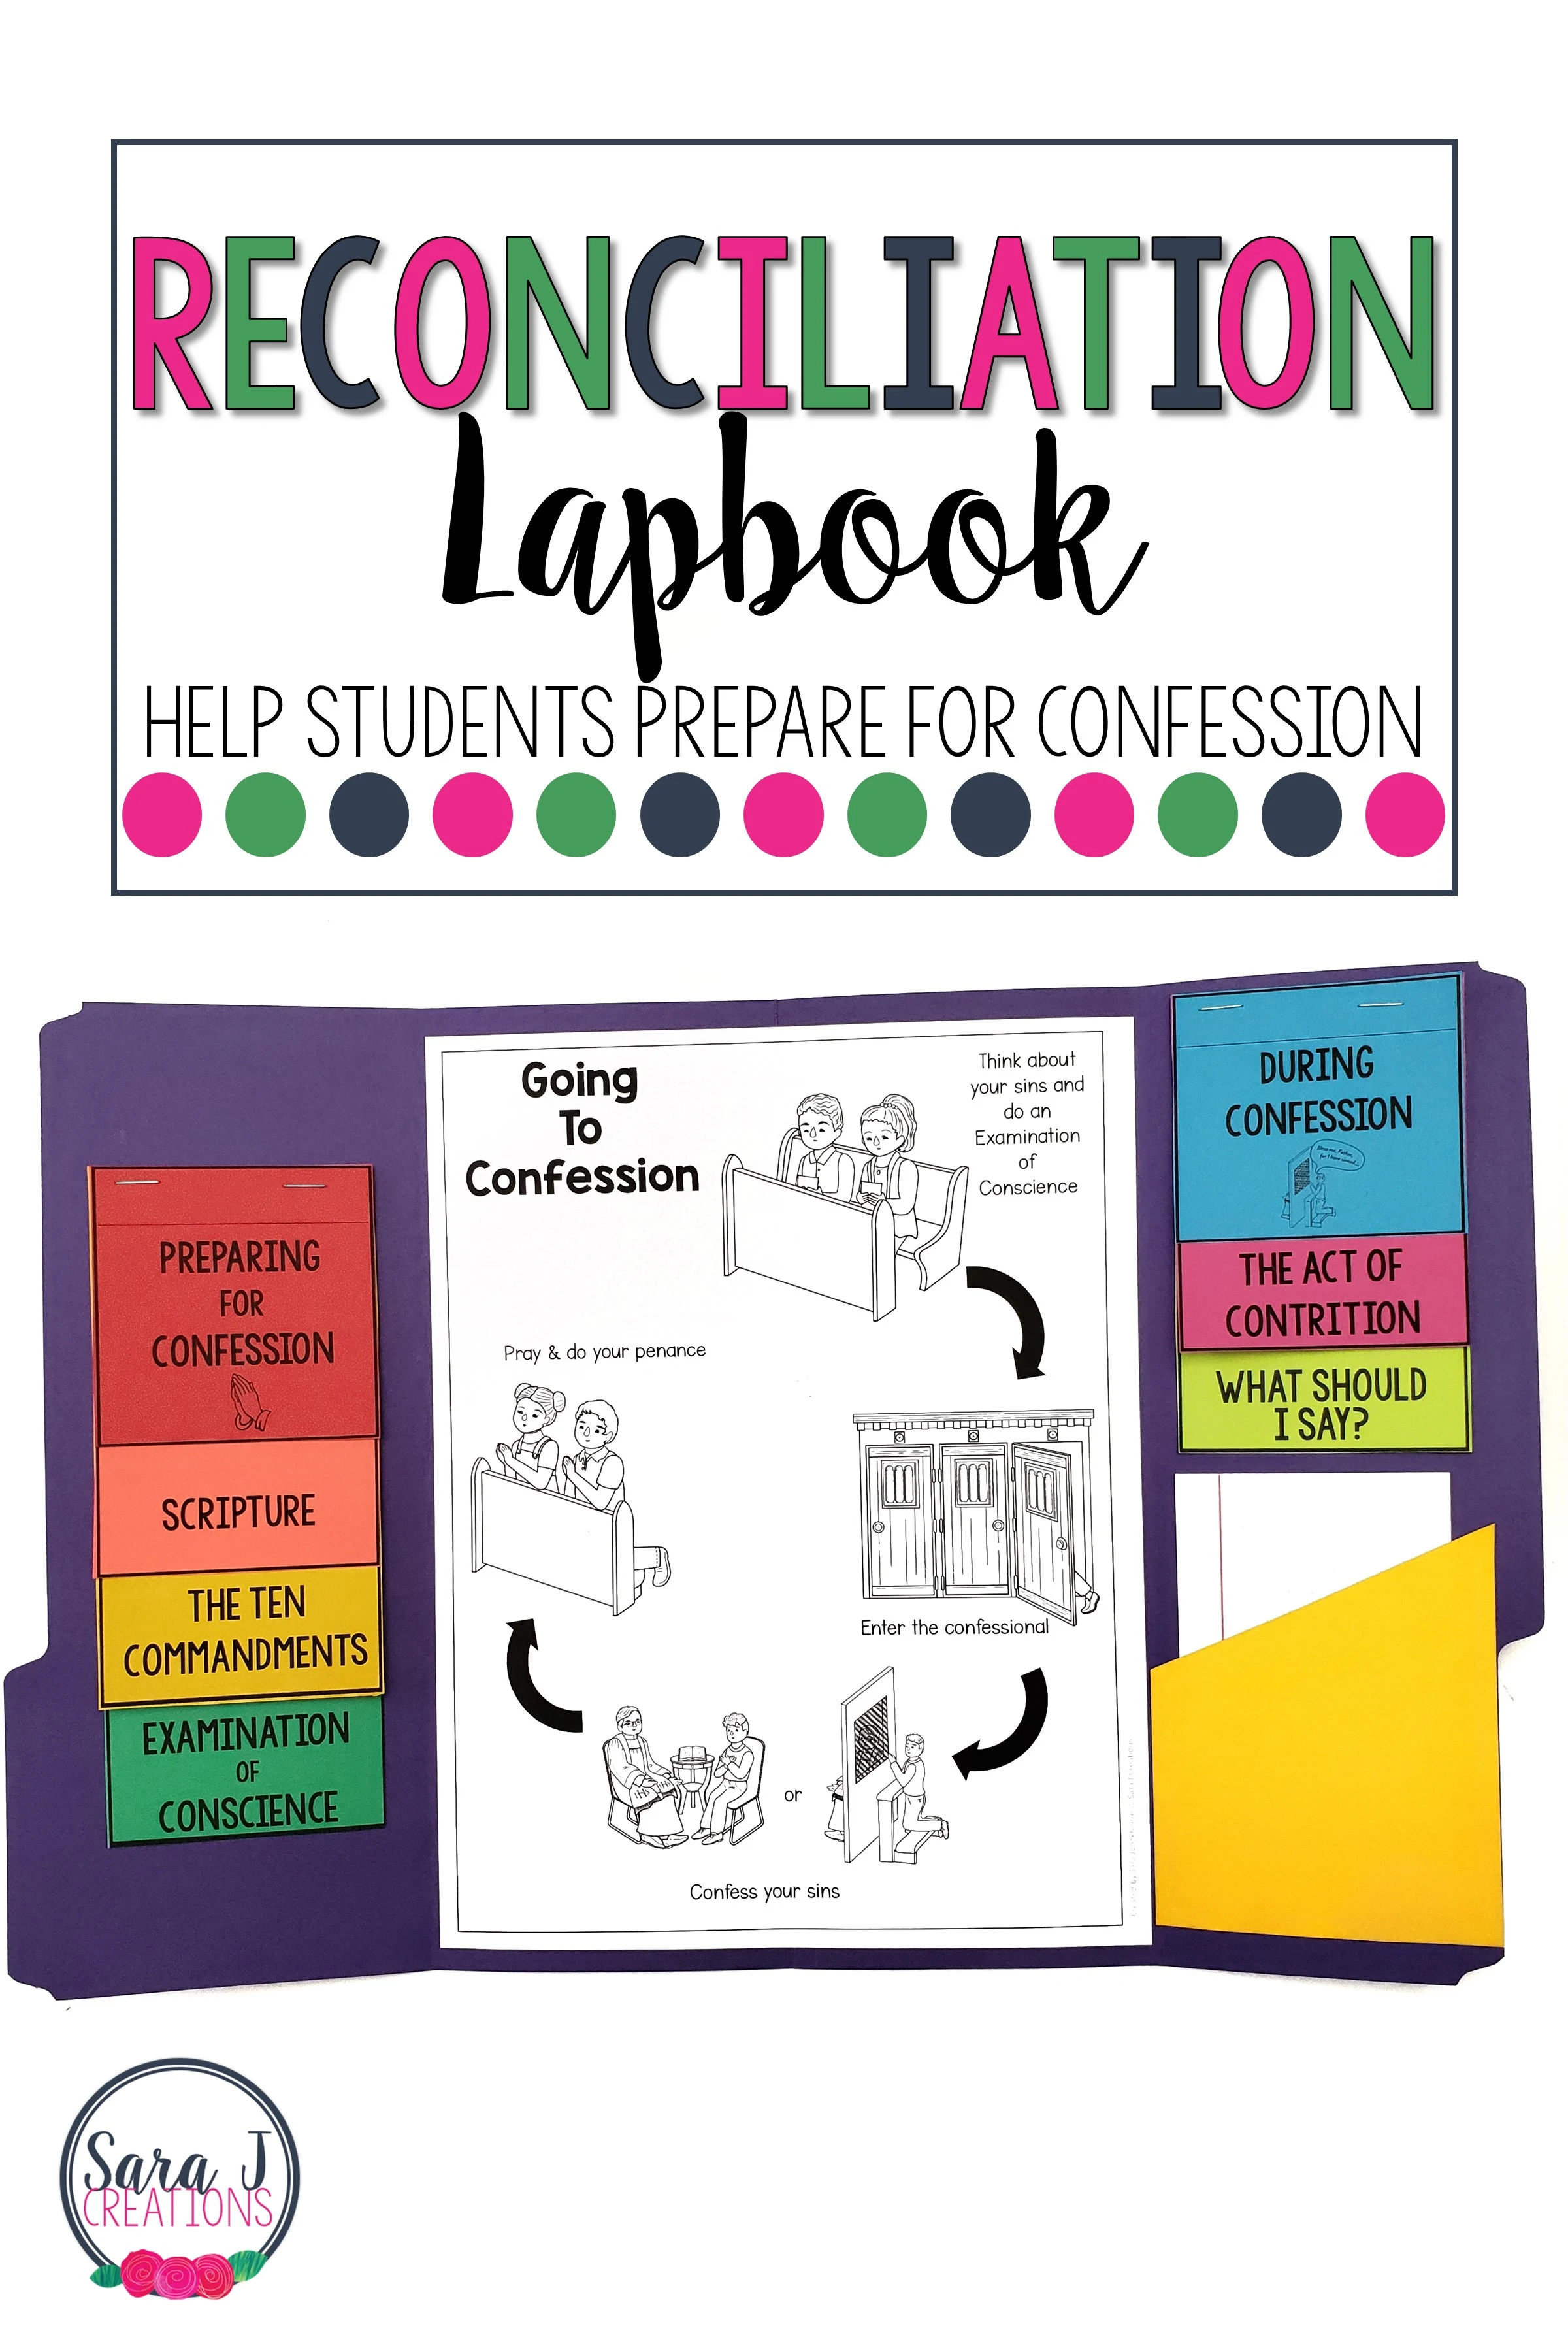 Help your students prepare for the sacrament of reconciliation with this confession lapbook